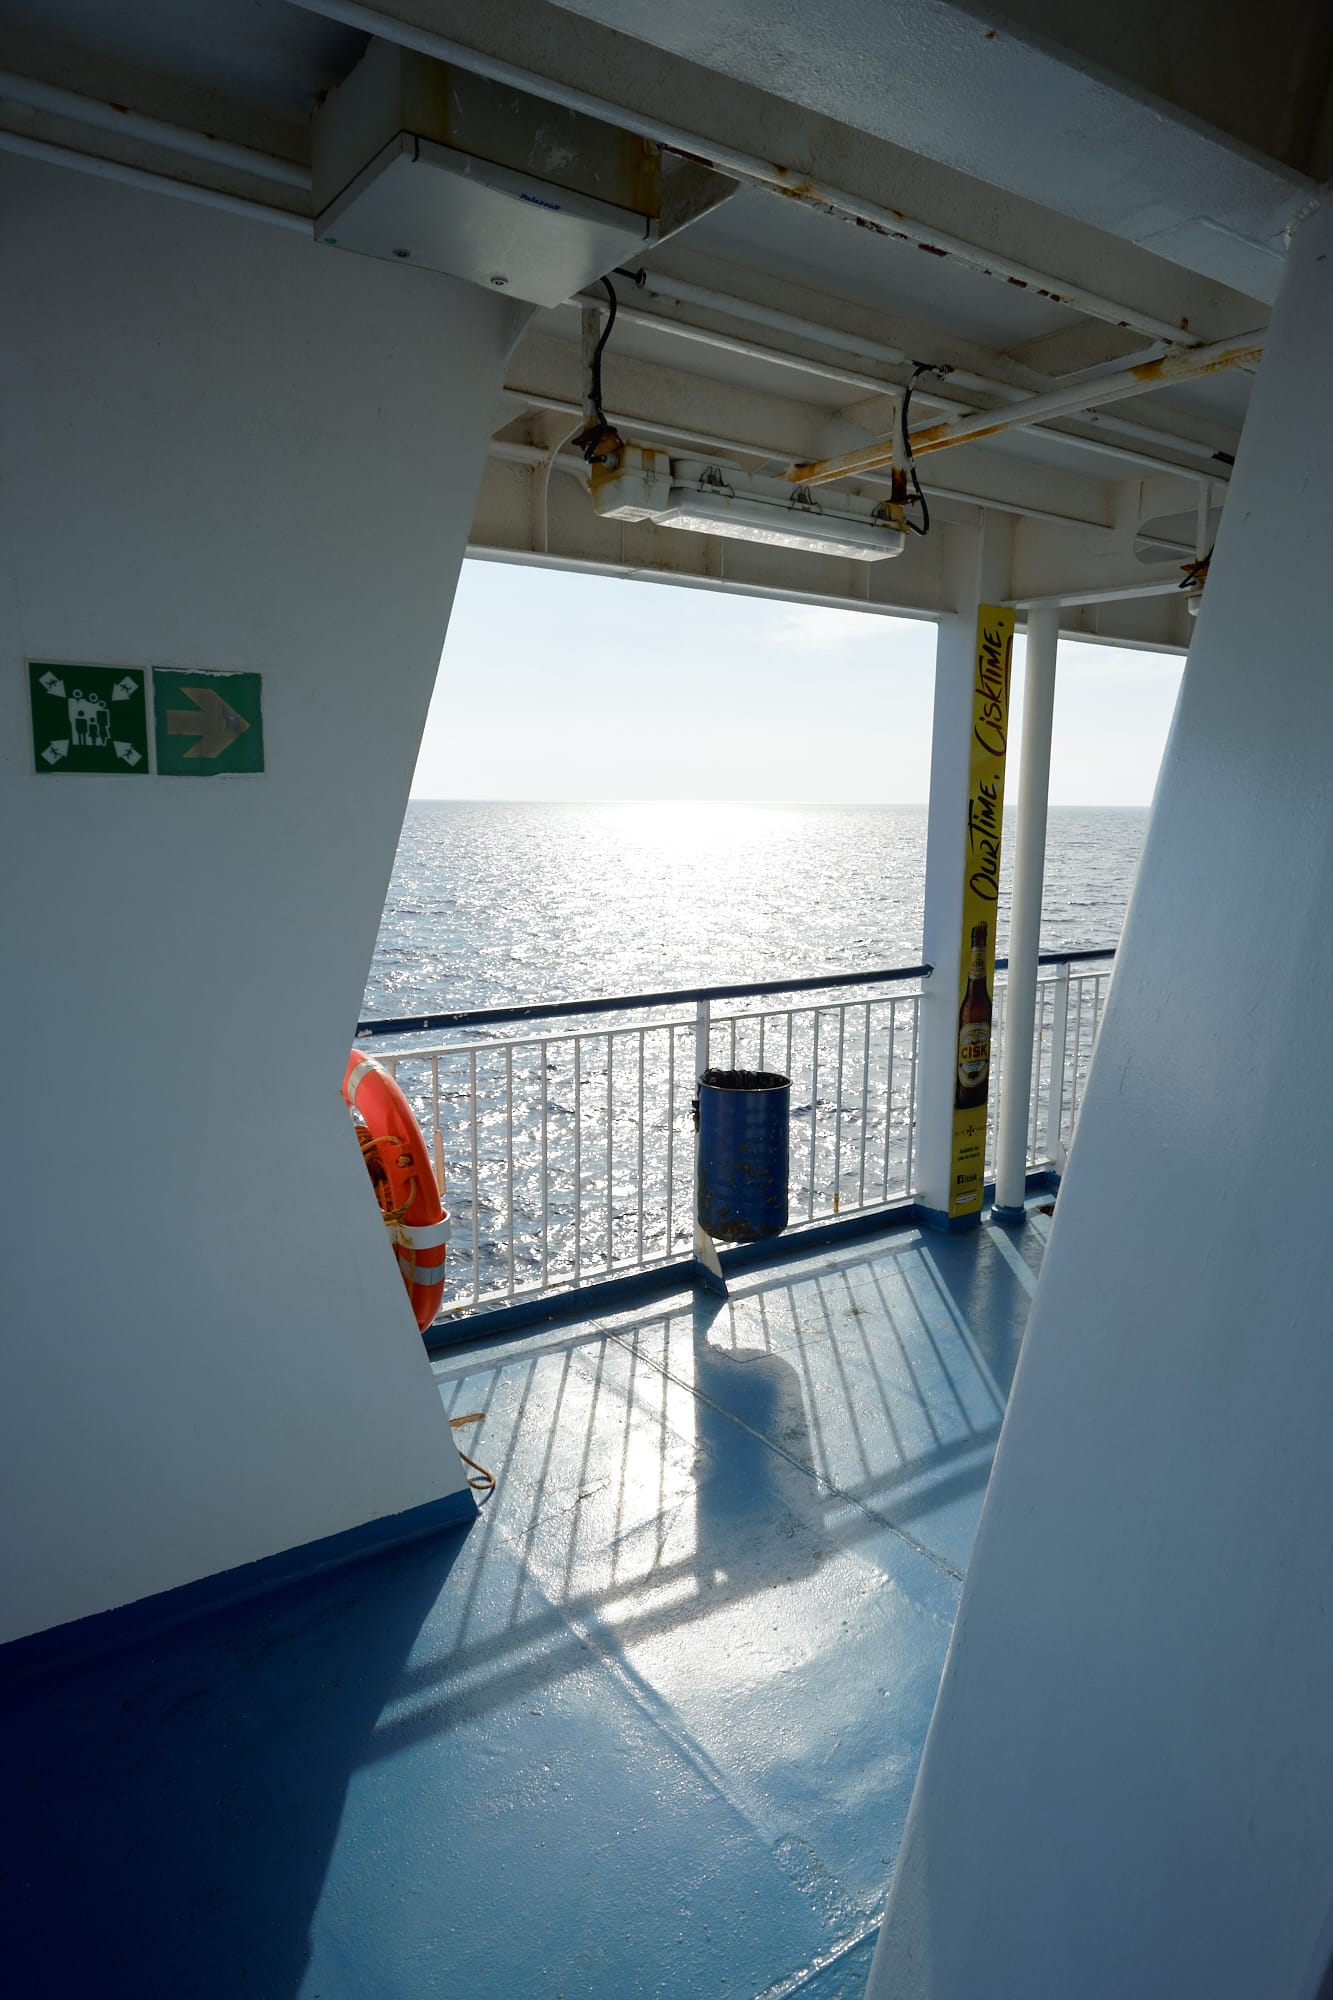 looking out over the side of the ferry towards the sun